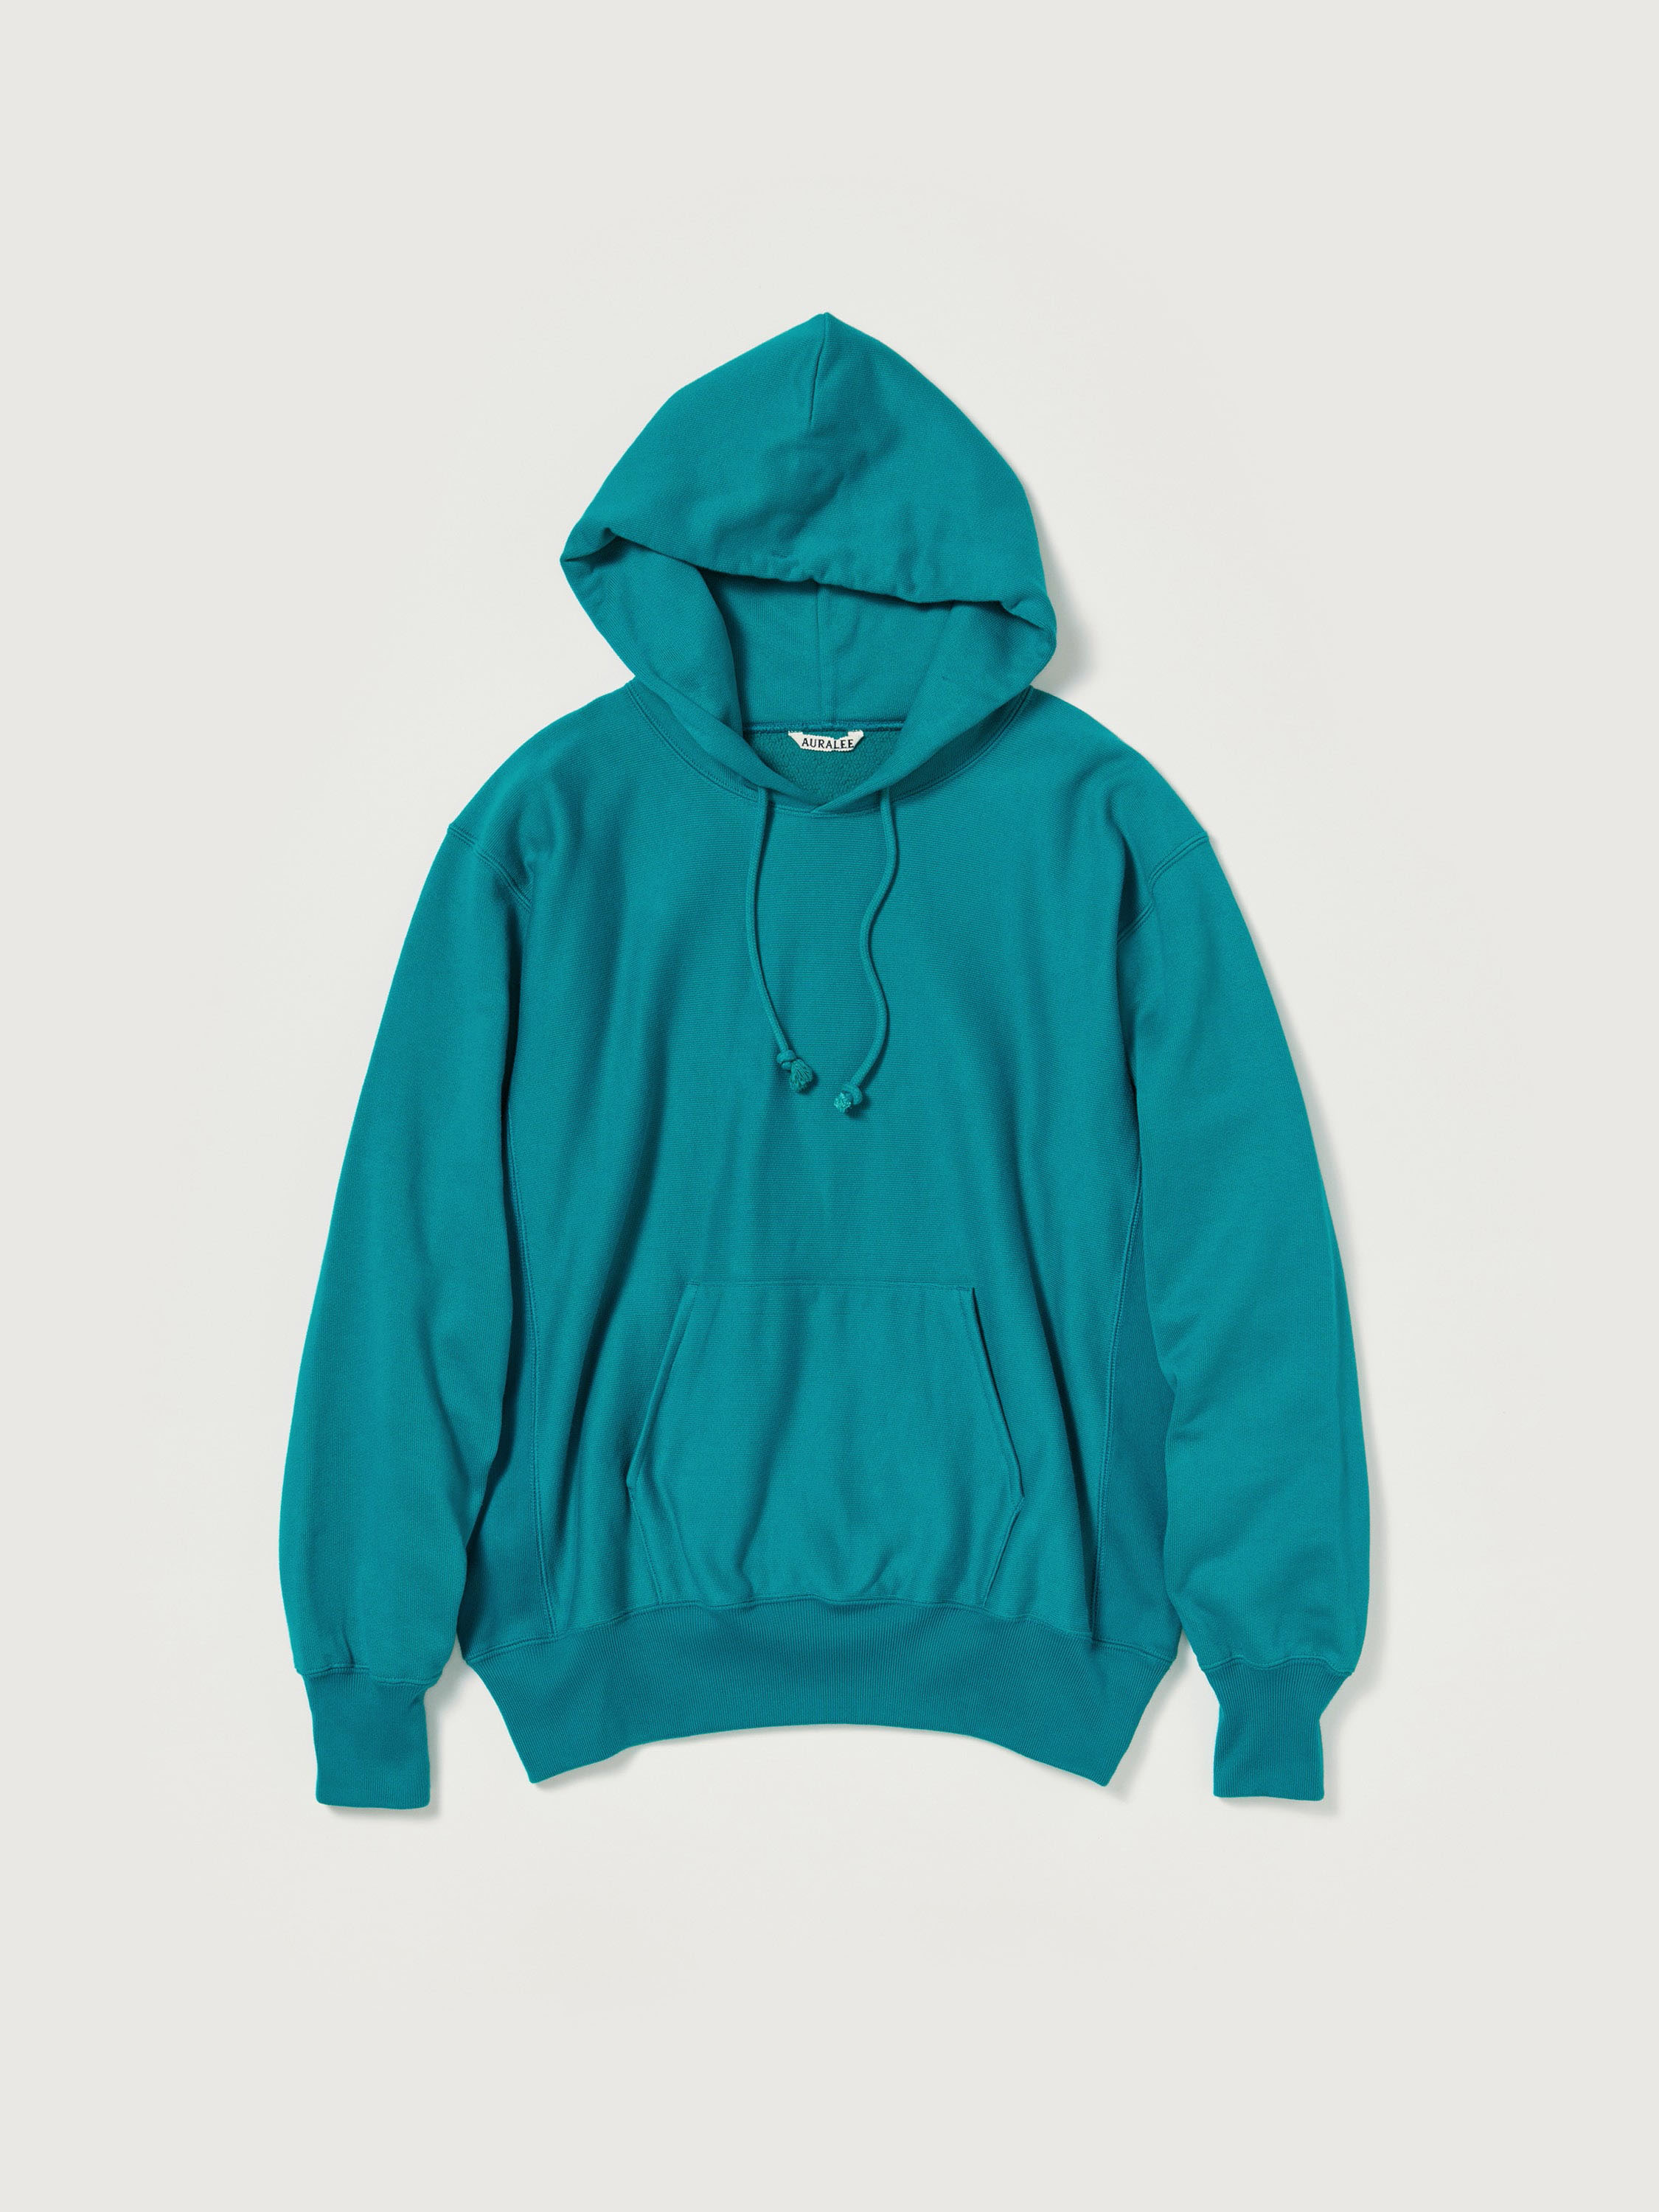 HIGH COUNT HEAVY SWEAT P/O PARKA 詳細画像 TEAL GREEN 3